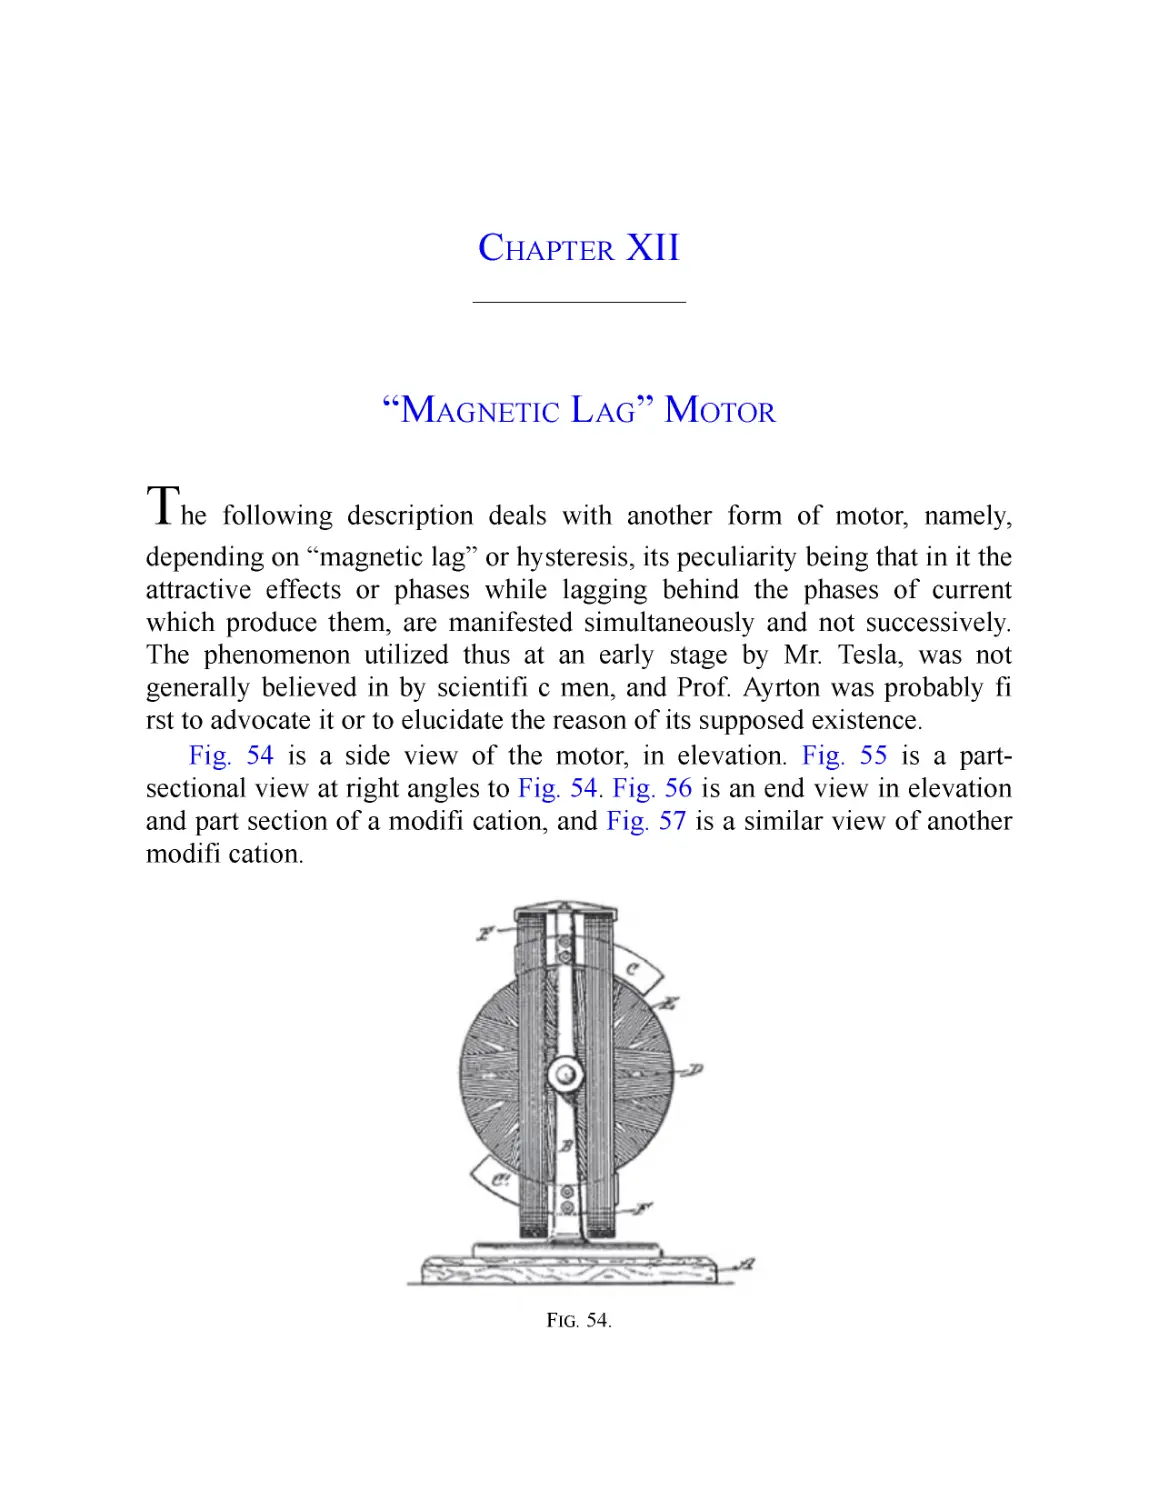 ﻿Chapter XII: “Magnetic Lag” Moto